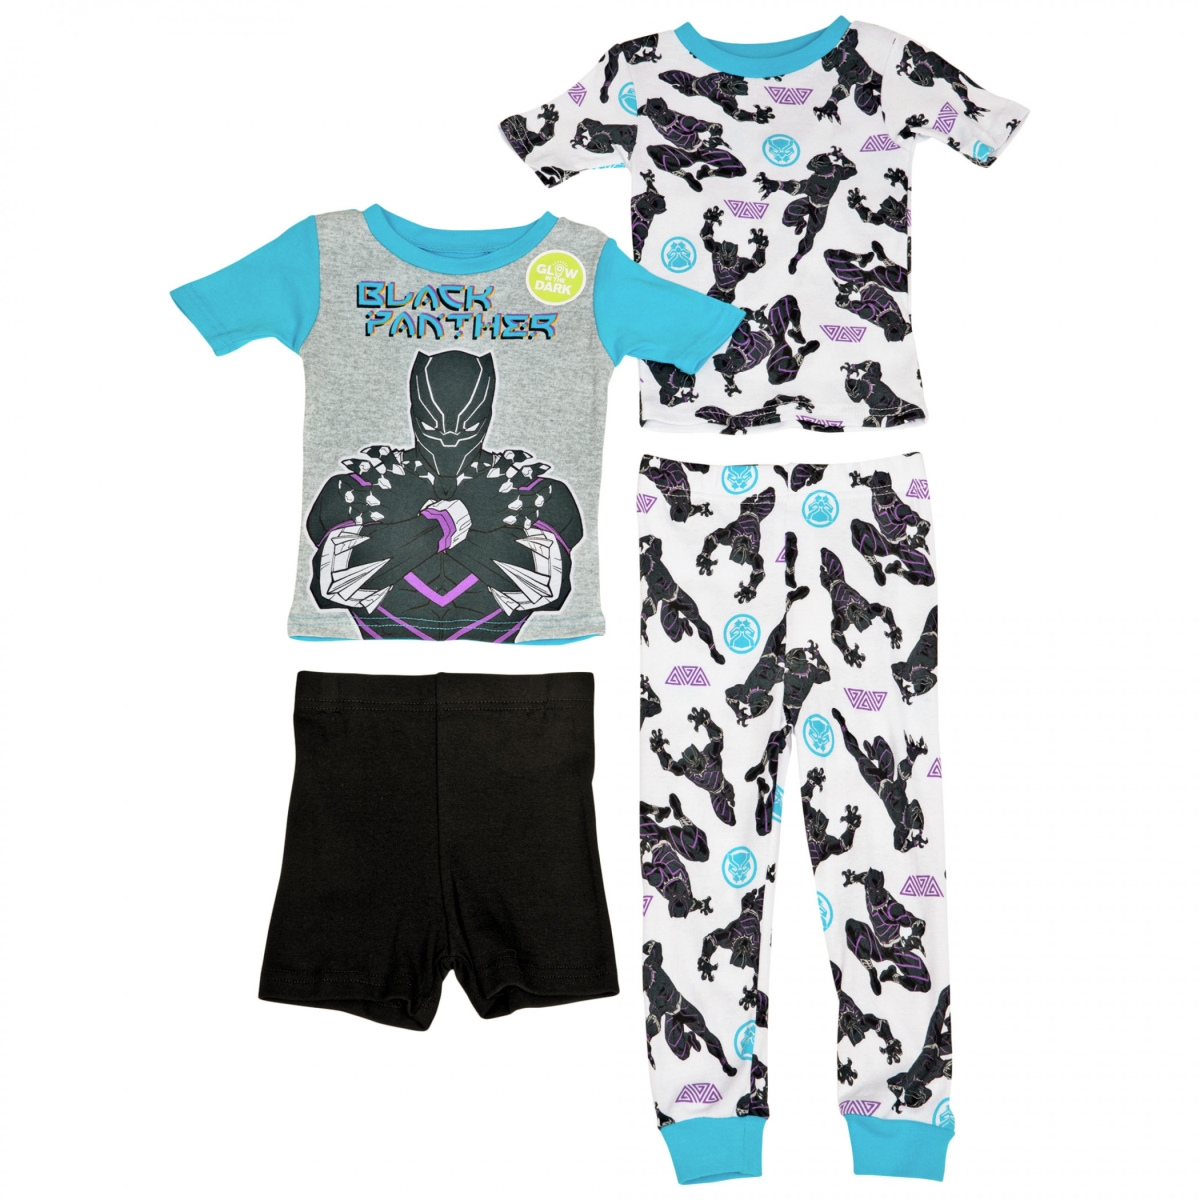 Picture of Black Panther 838760-size6 Black Panther Youth Glow in the Dark Shirt & Pants Set - Size 6 - 4 Piece